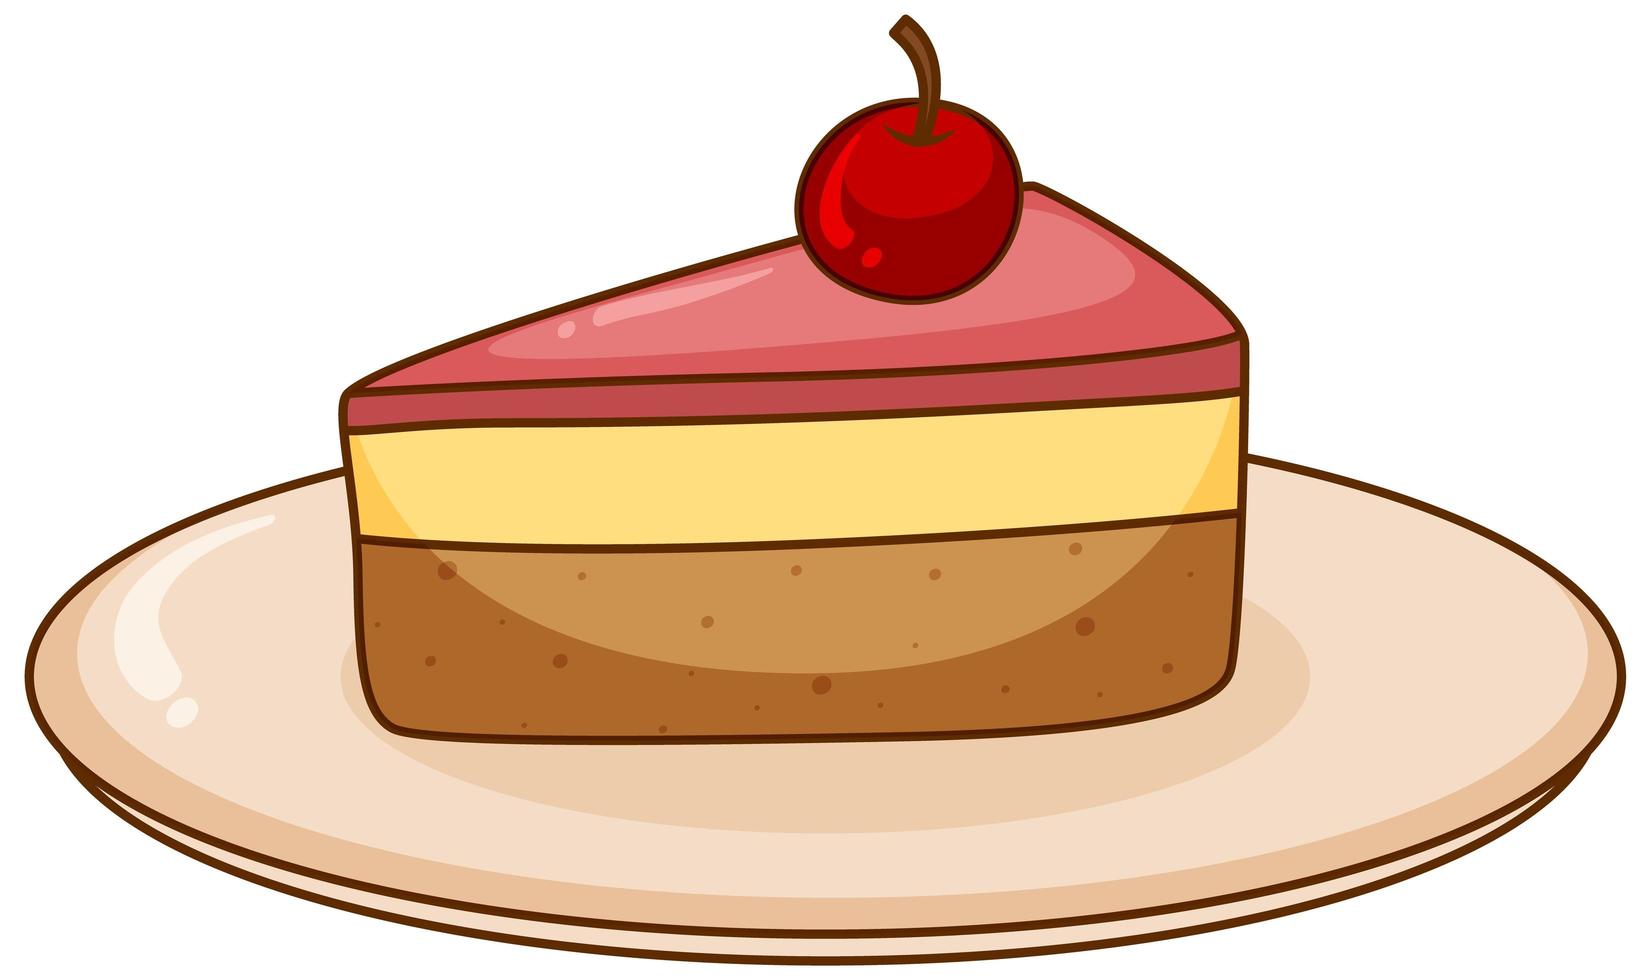 One piece of strawberry cake on the plate vector